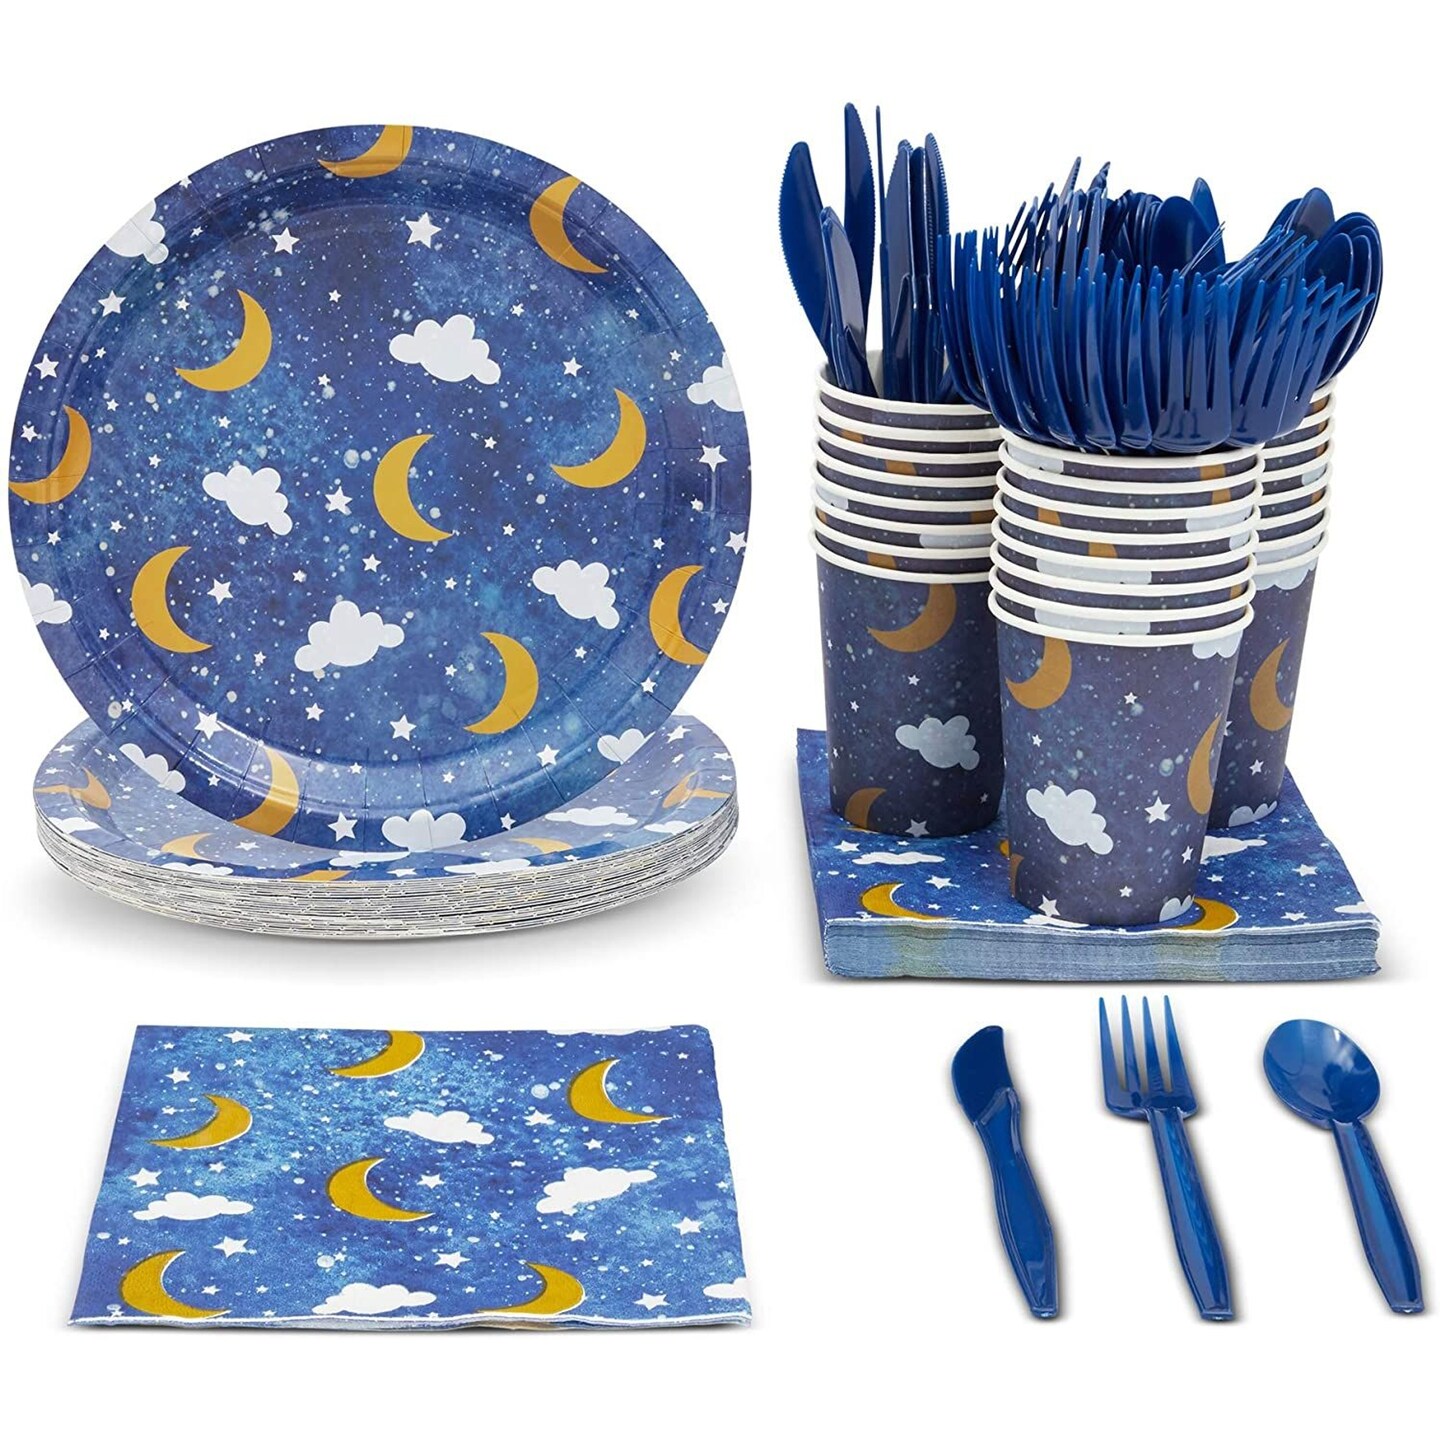 Twinkle Twinkle Little Star Baby Shower Decorations with Paper Plates, Napkins, Cups and Cutlery (Serves 24)